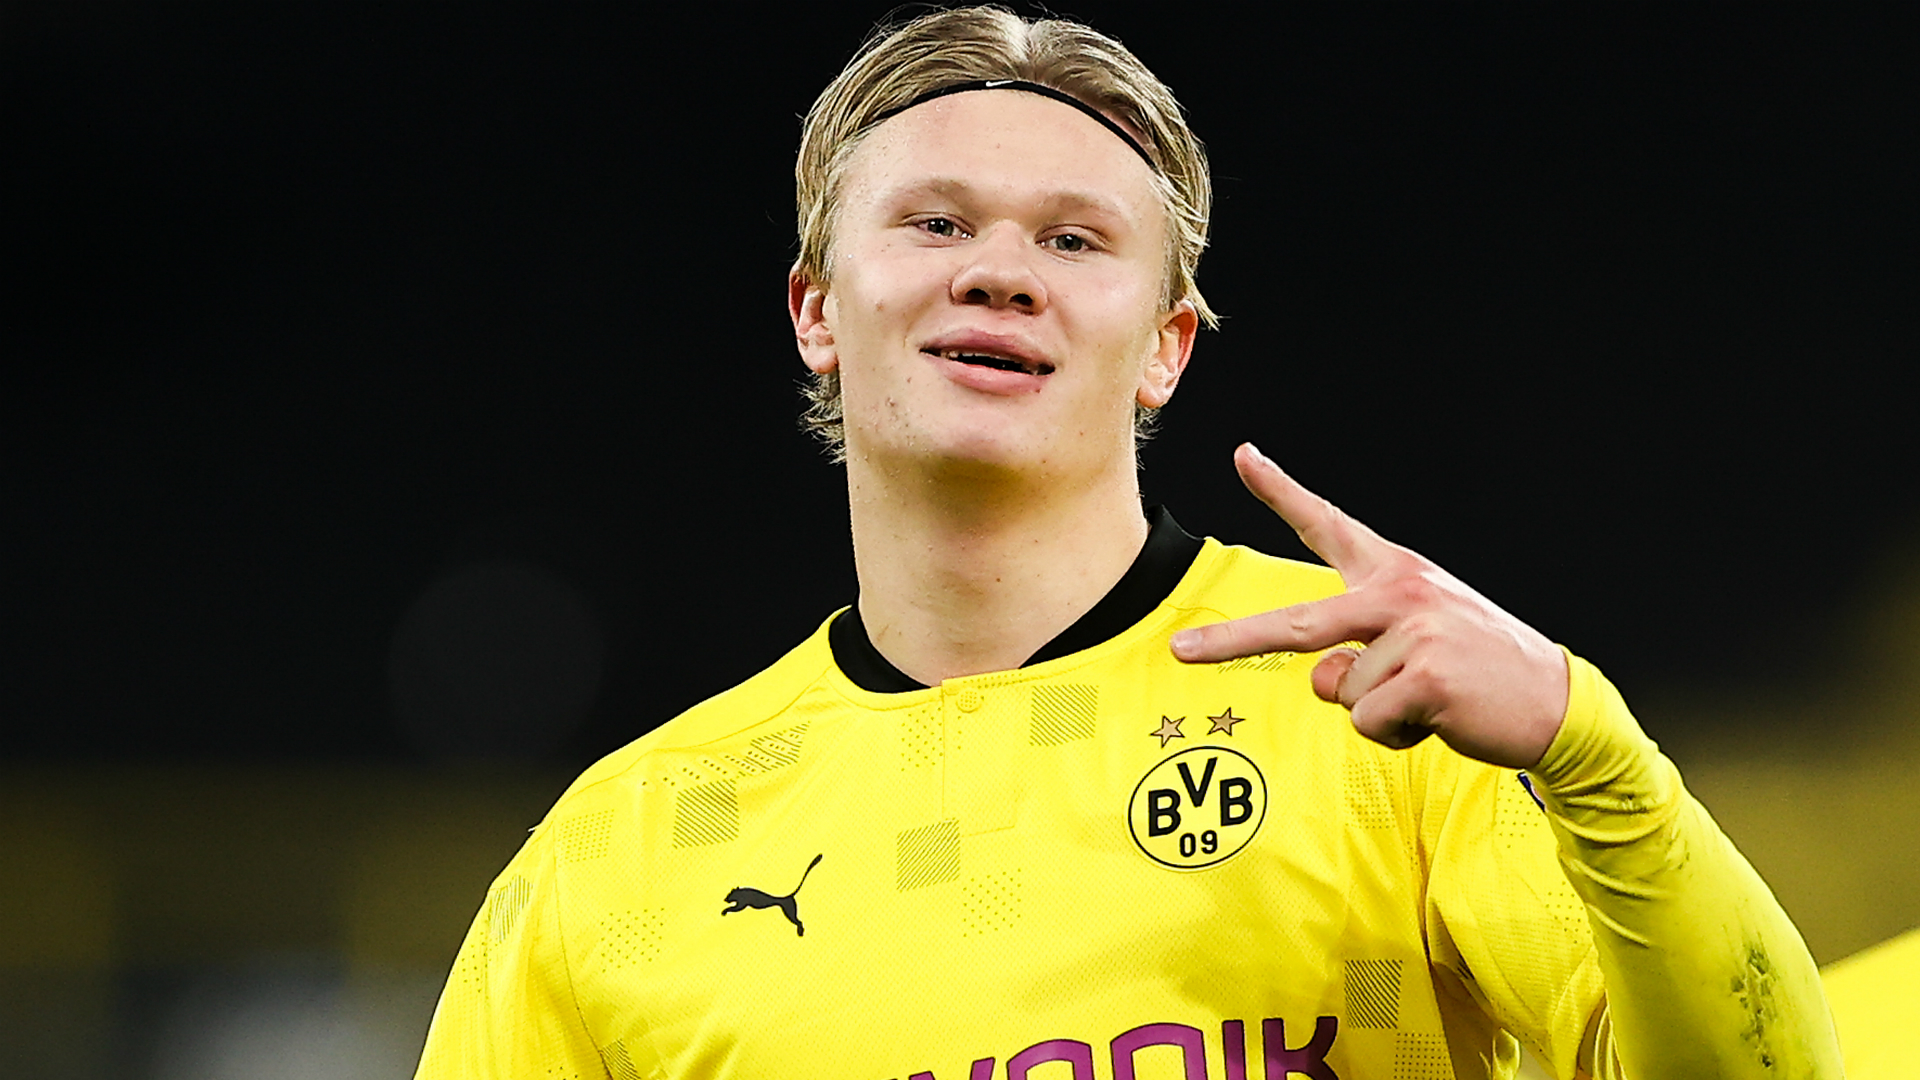 Erling Haaland's performance drew praise from team-mates Jude Bellingham and Jadon Sancho on Tuesday.